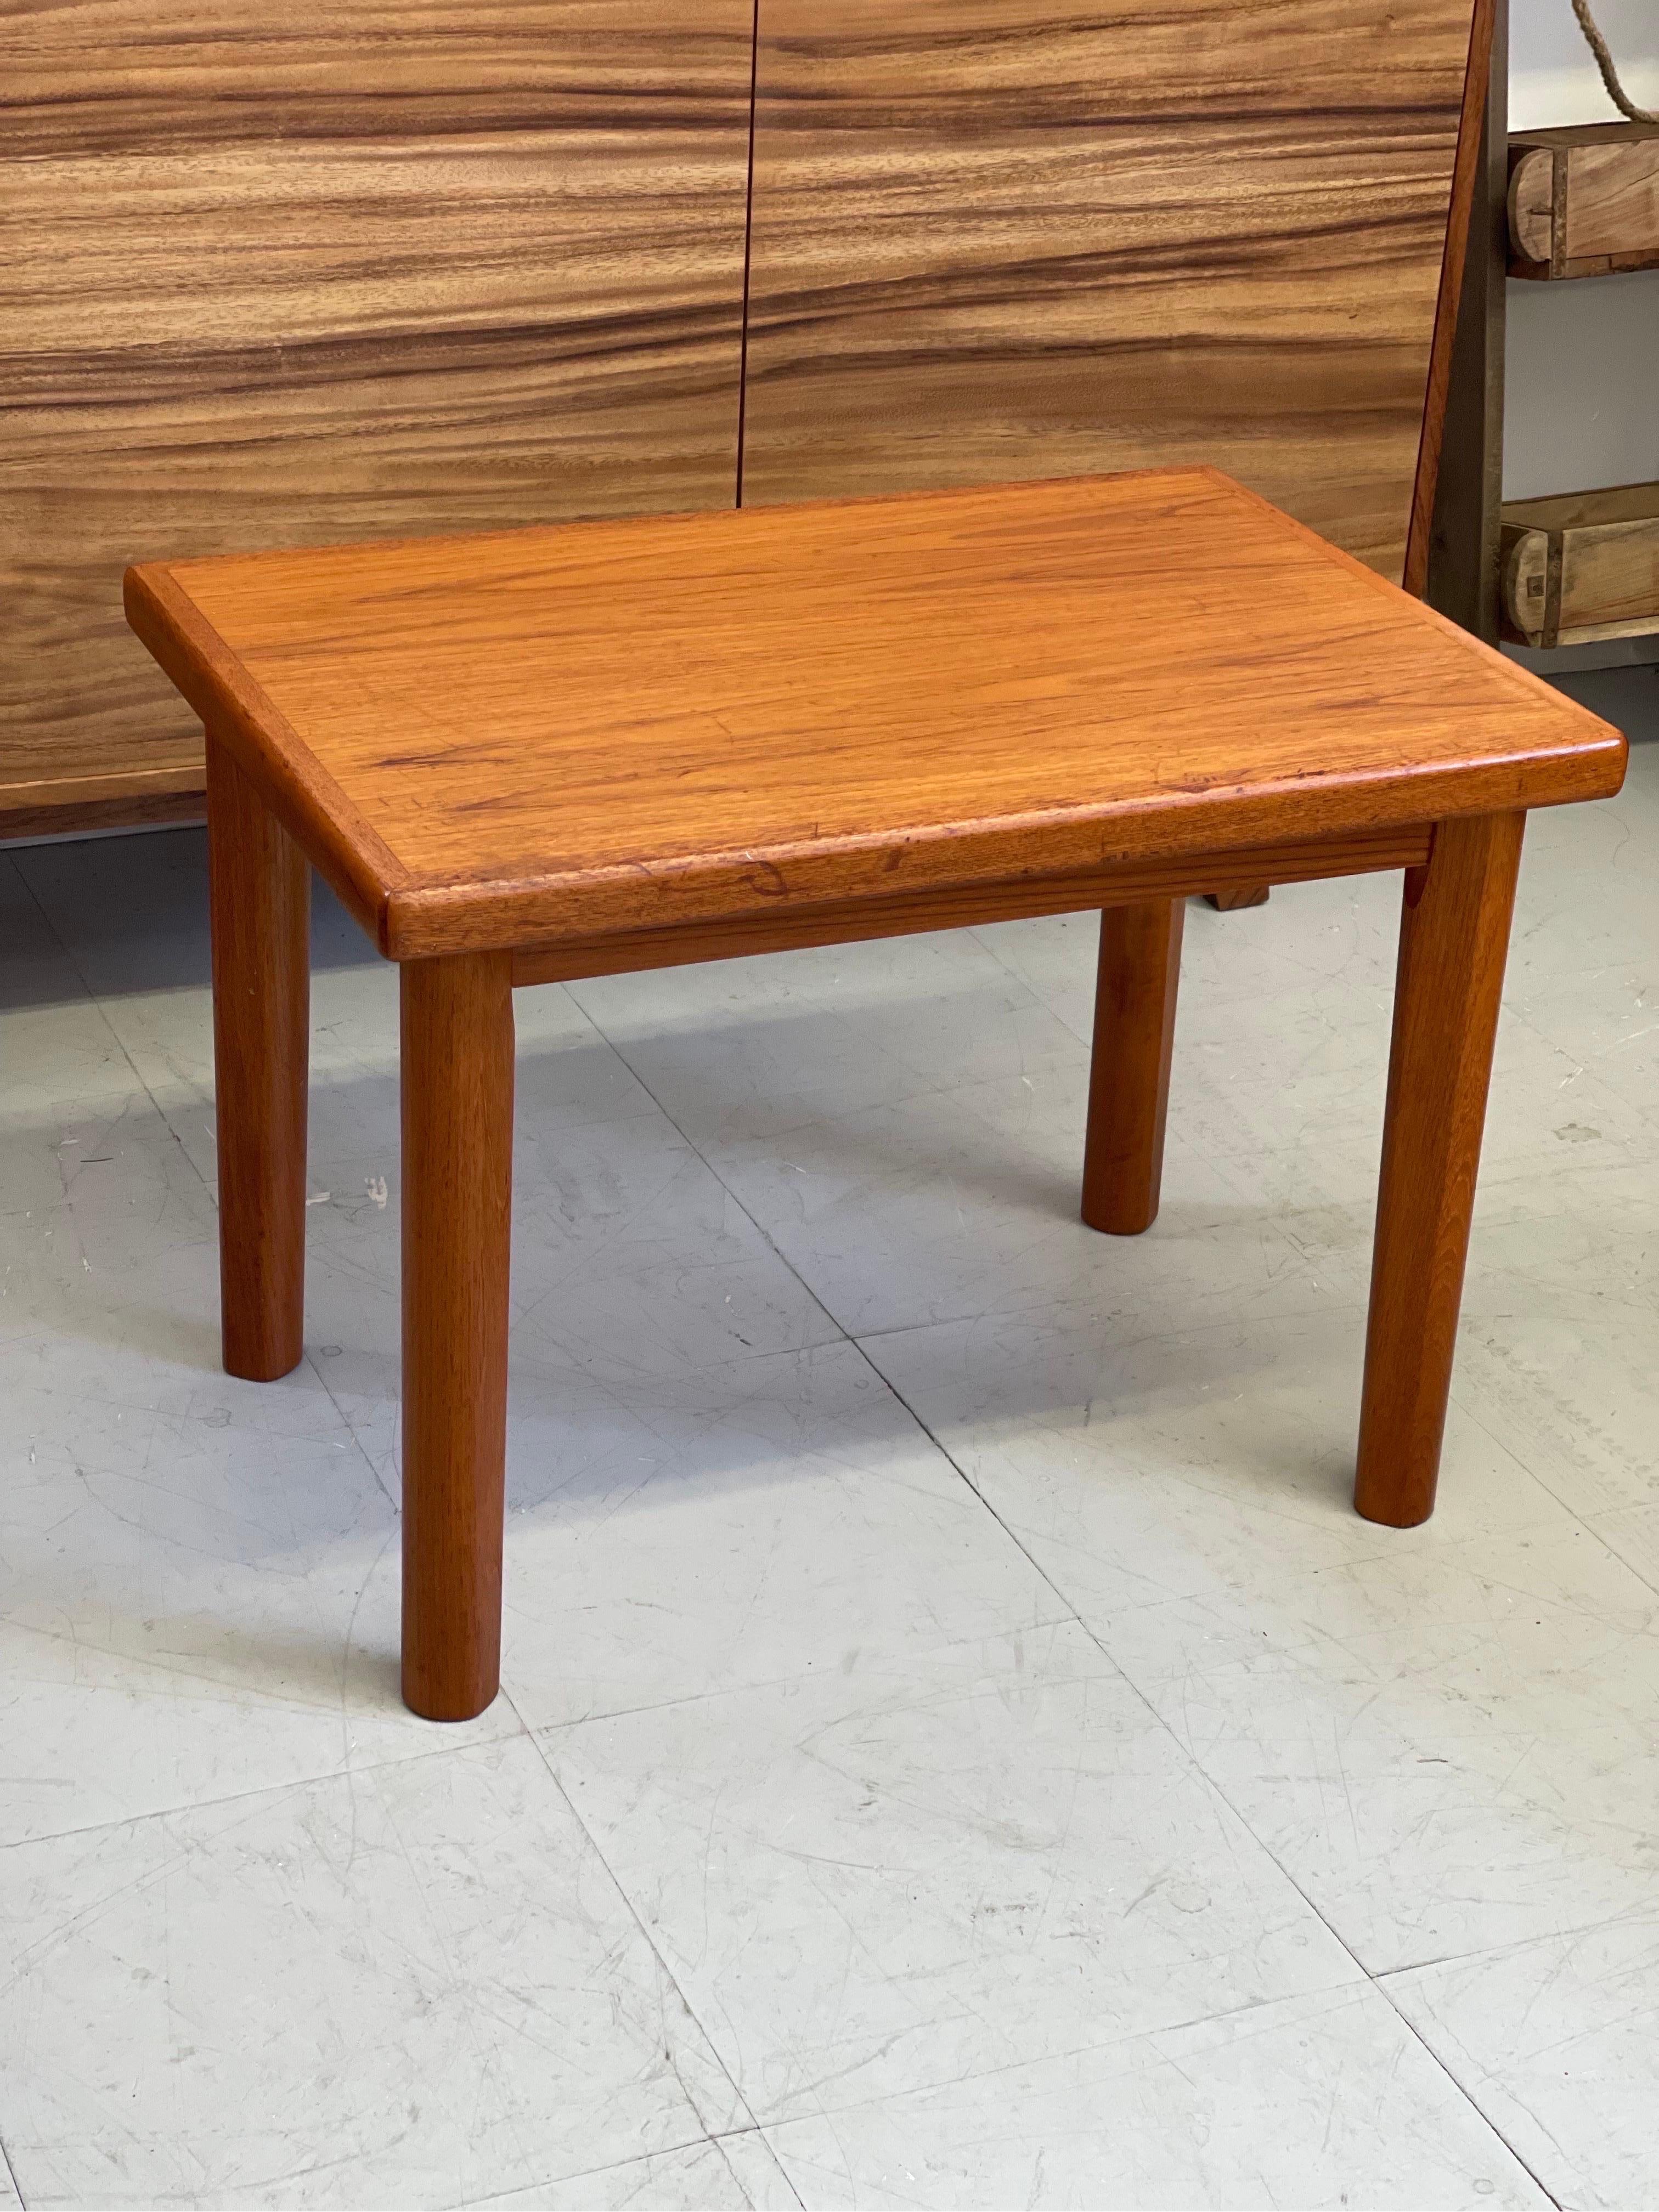 Wood Vintage Danish Modern Mid-Century Modern Accent Table For Sale